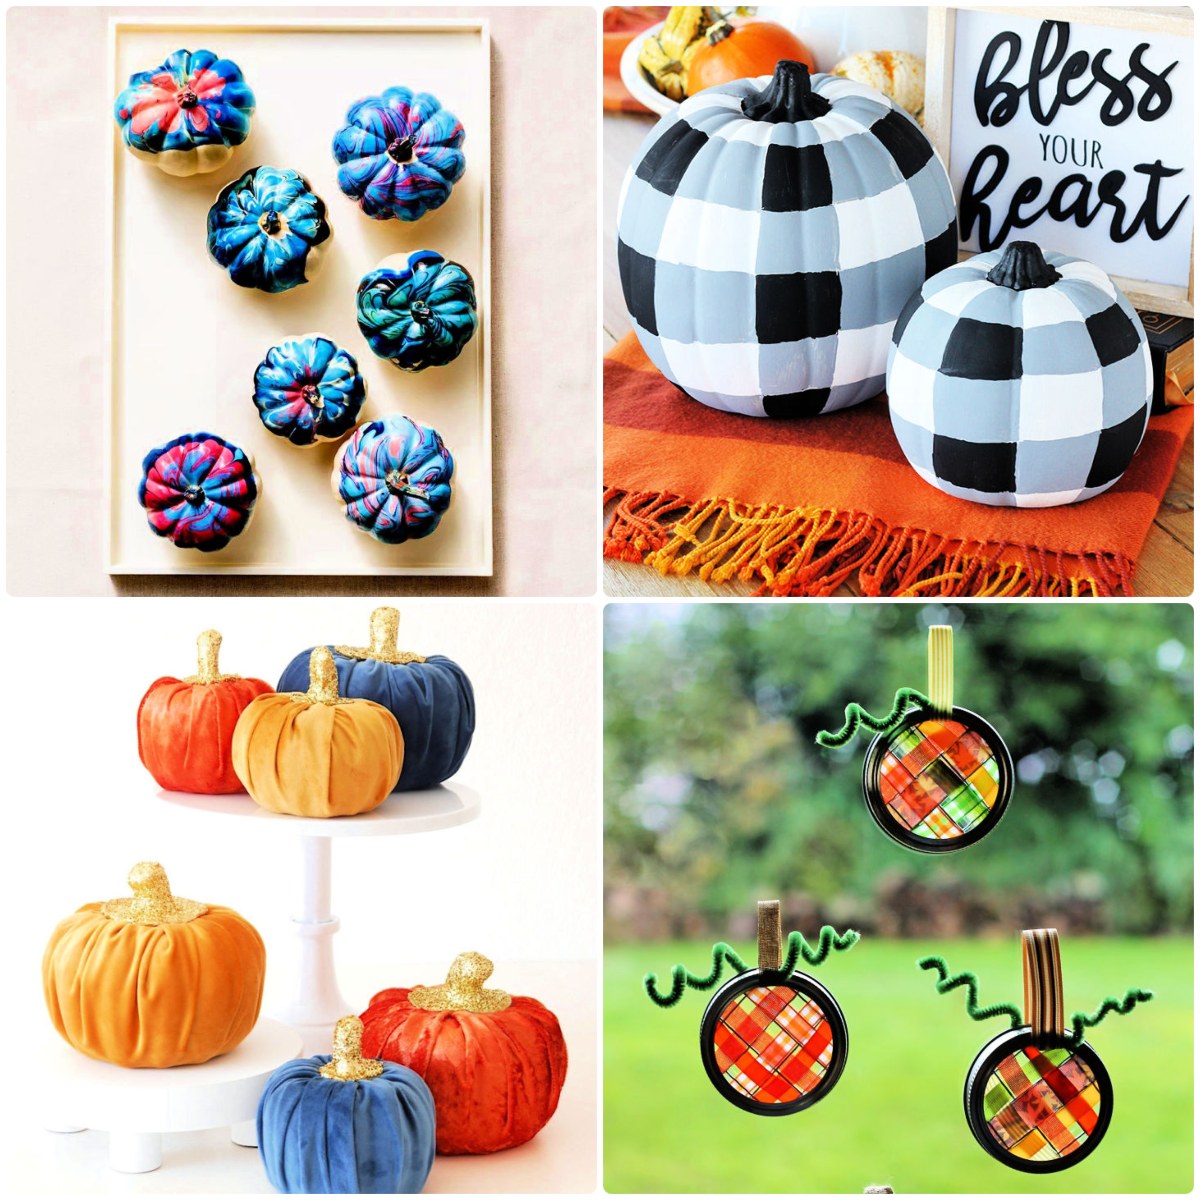 How to Make Puffy Paint Pumpkins for a Fall Art Activity